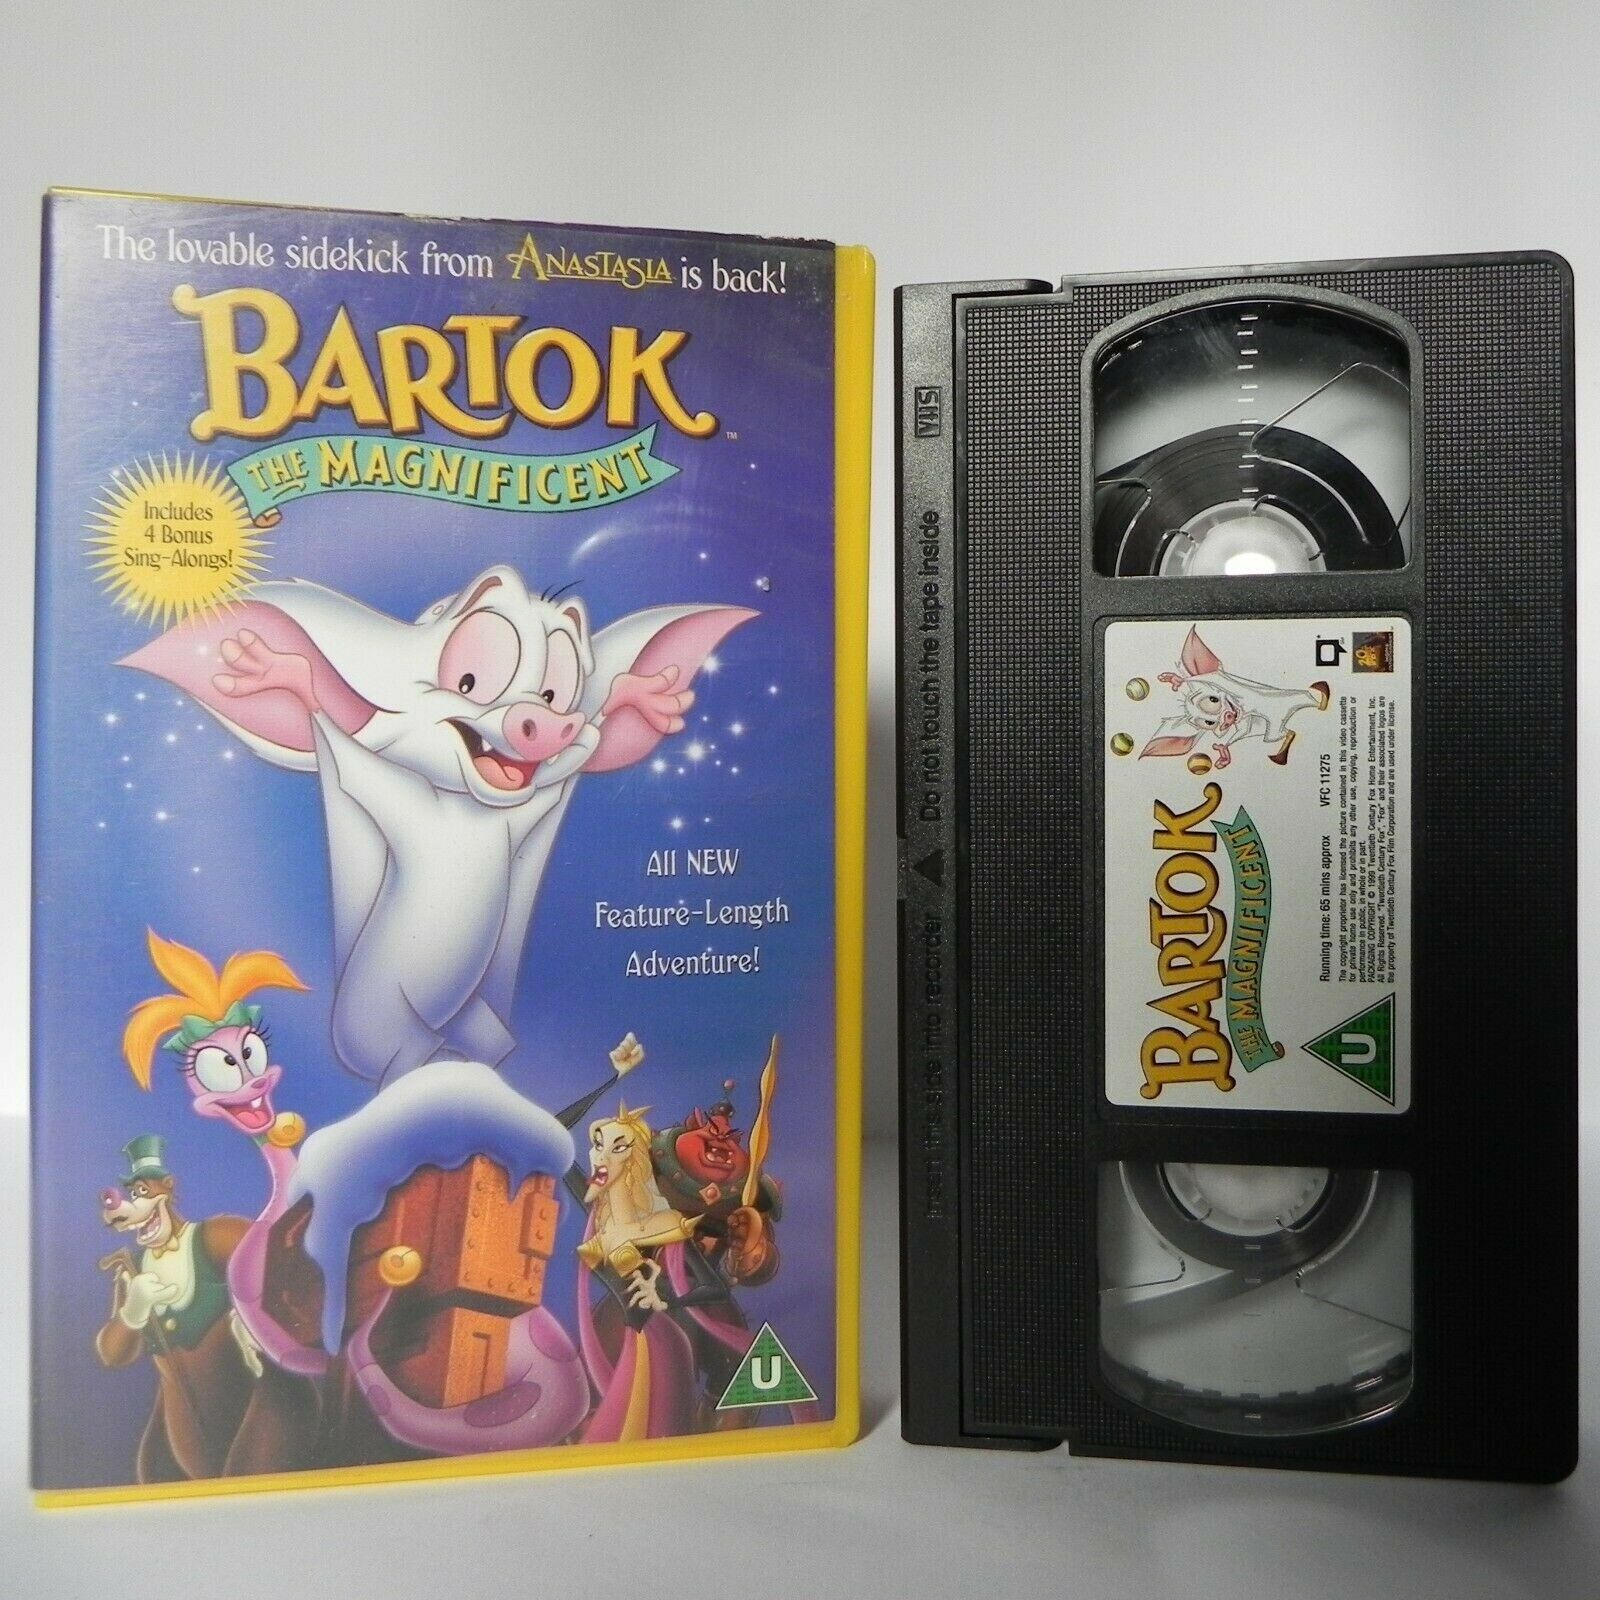 Bartok The Magnificent - Animated - Adventure - Sing Along Songs - Kids - VHS-